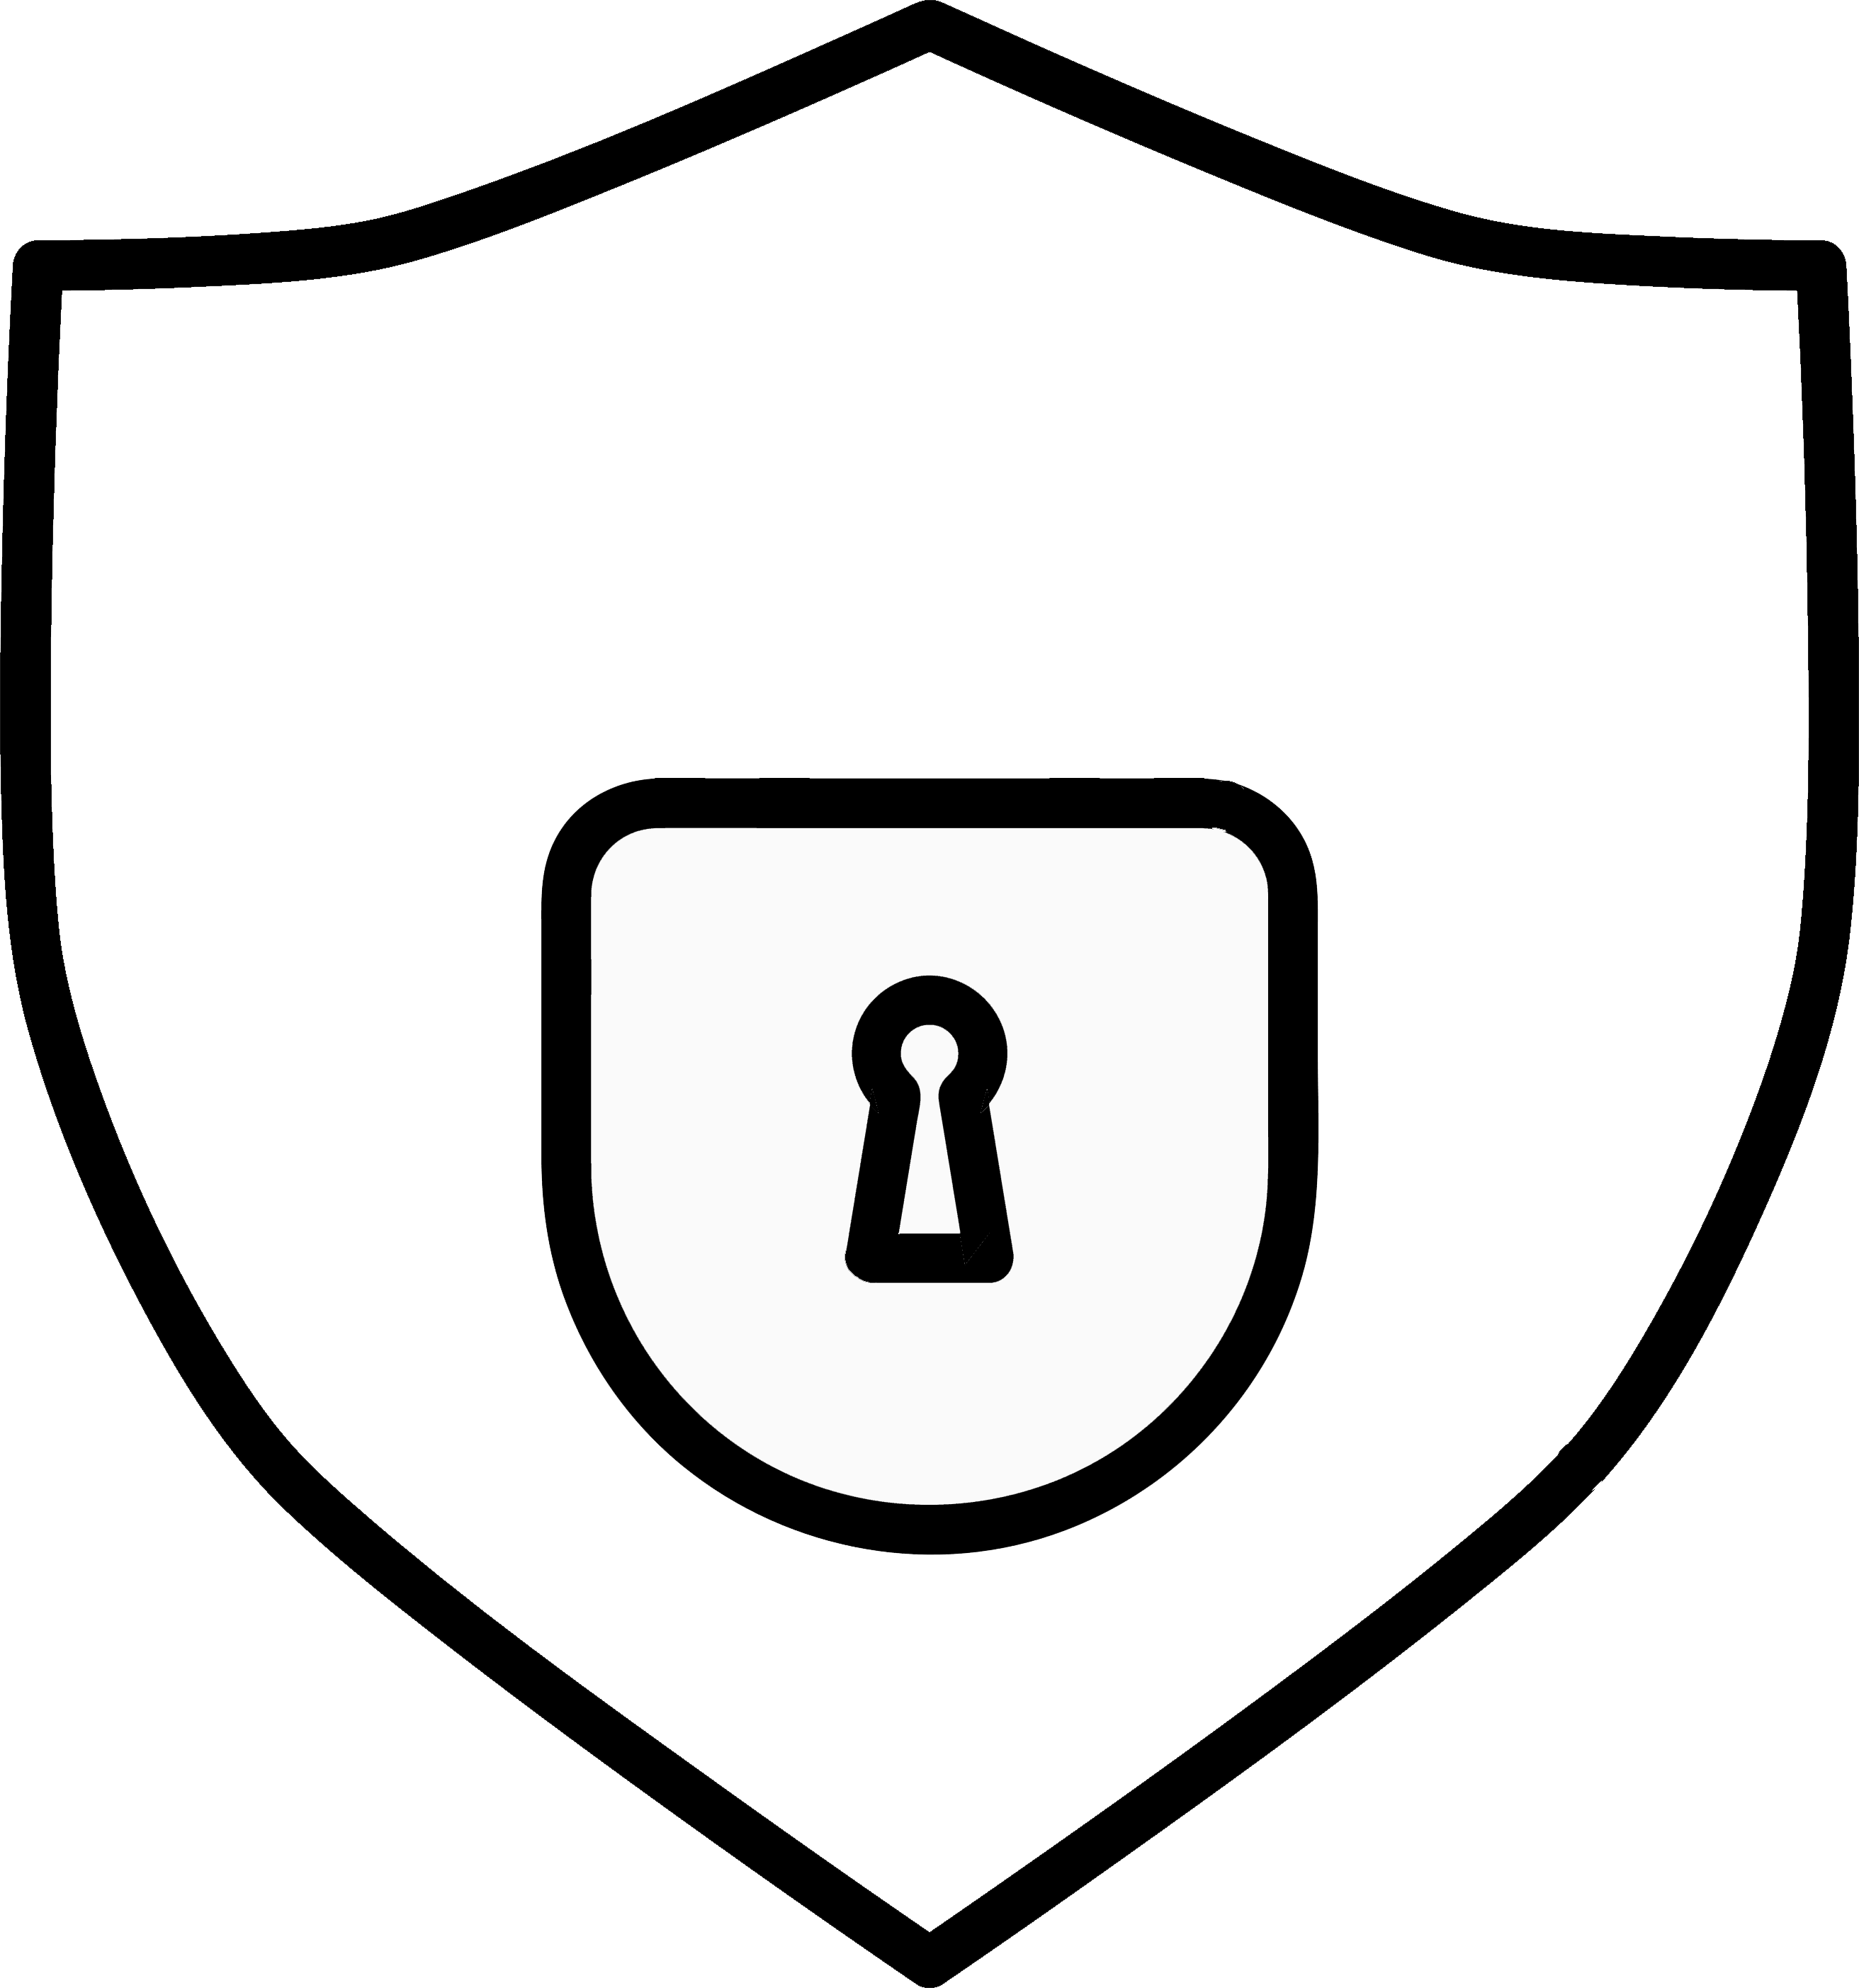 Graphic representation of a shield with a padlock as an illustration of protection and insurance.